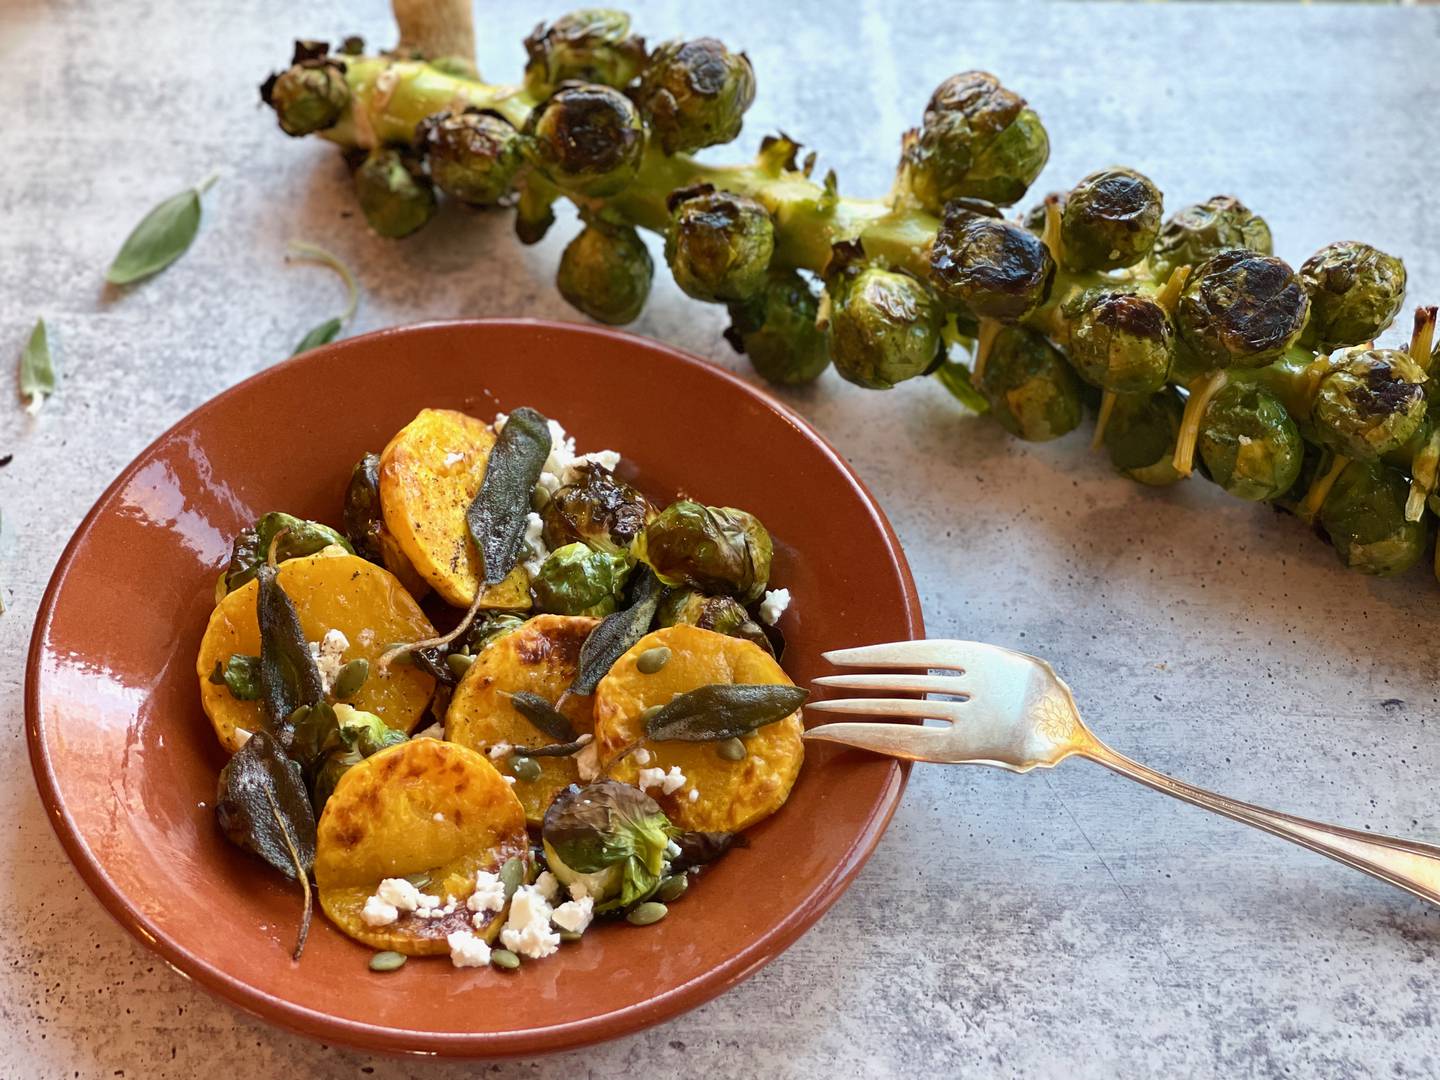 Roasted squash and Brussels sprouts with brown-butter fried sage